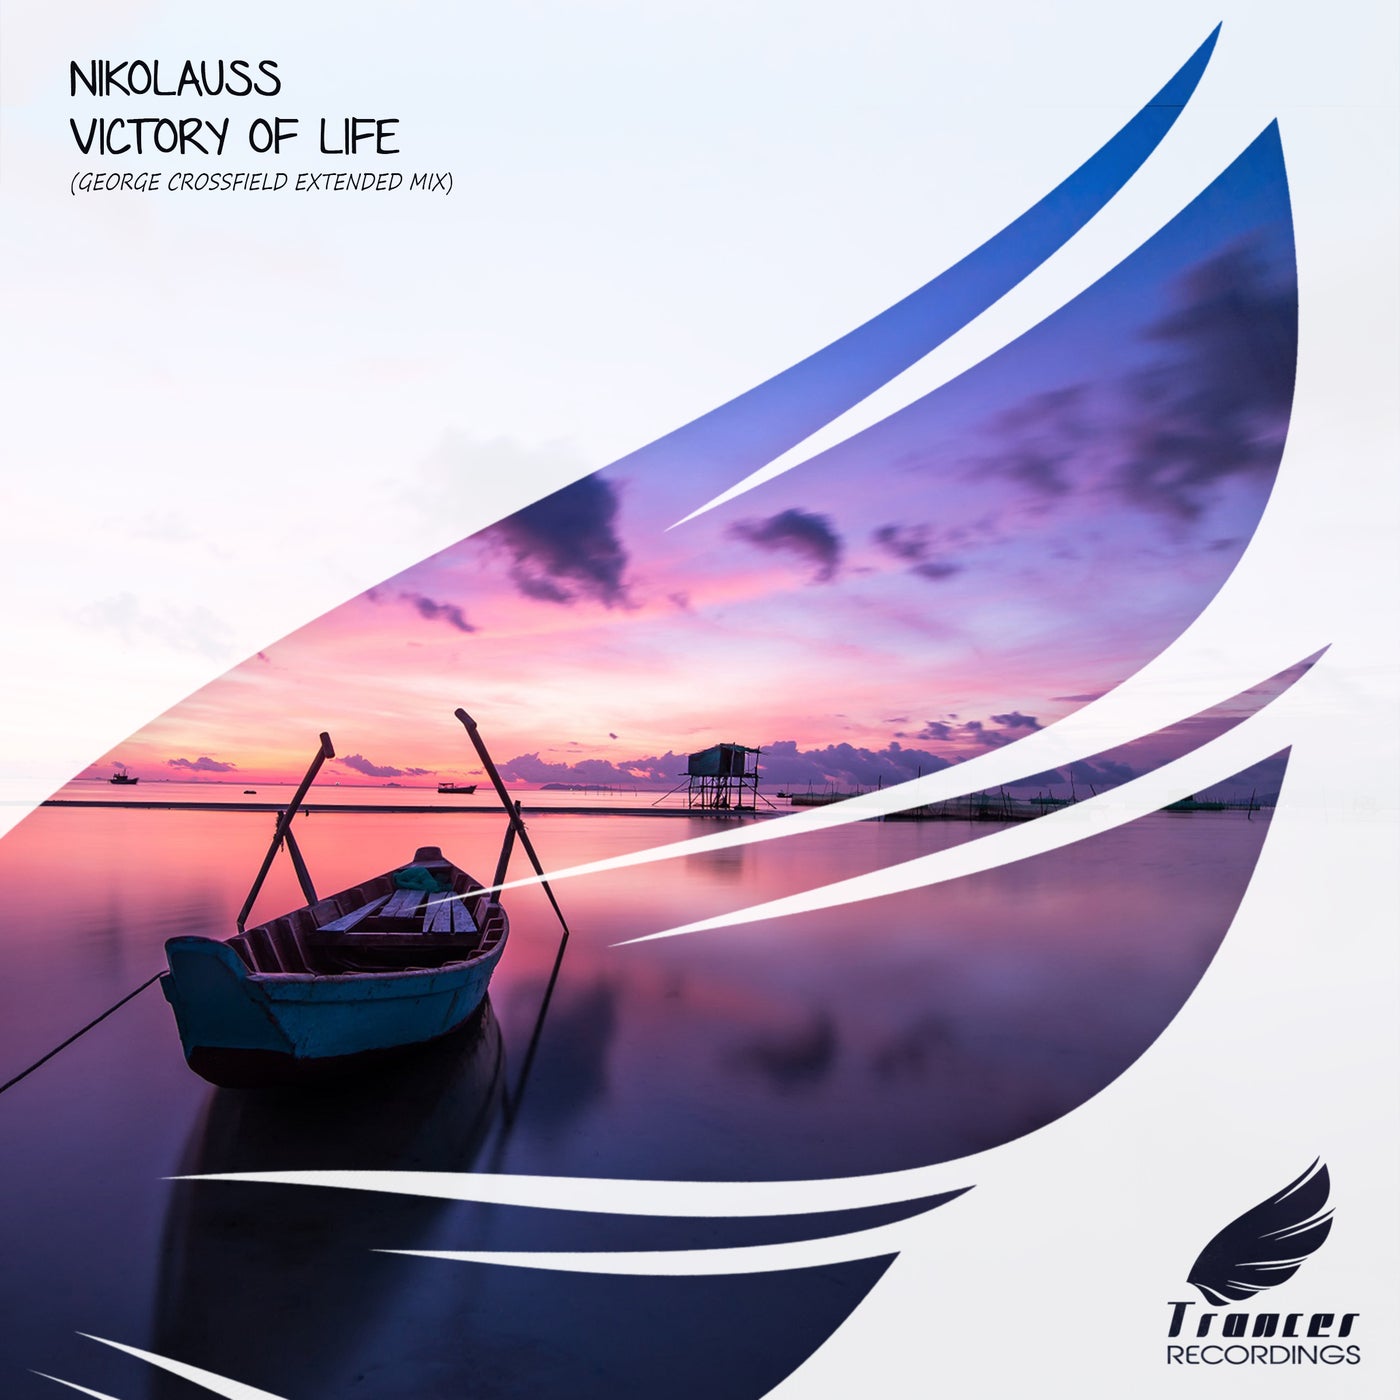 Nikolauss – Victory of Life (George Crossfield Extended Mix) [TR157]